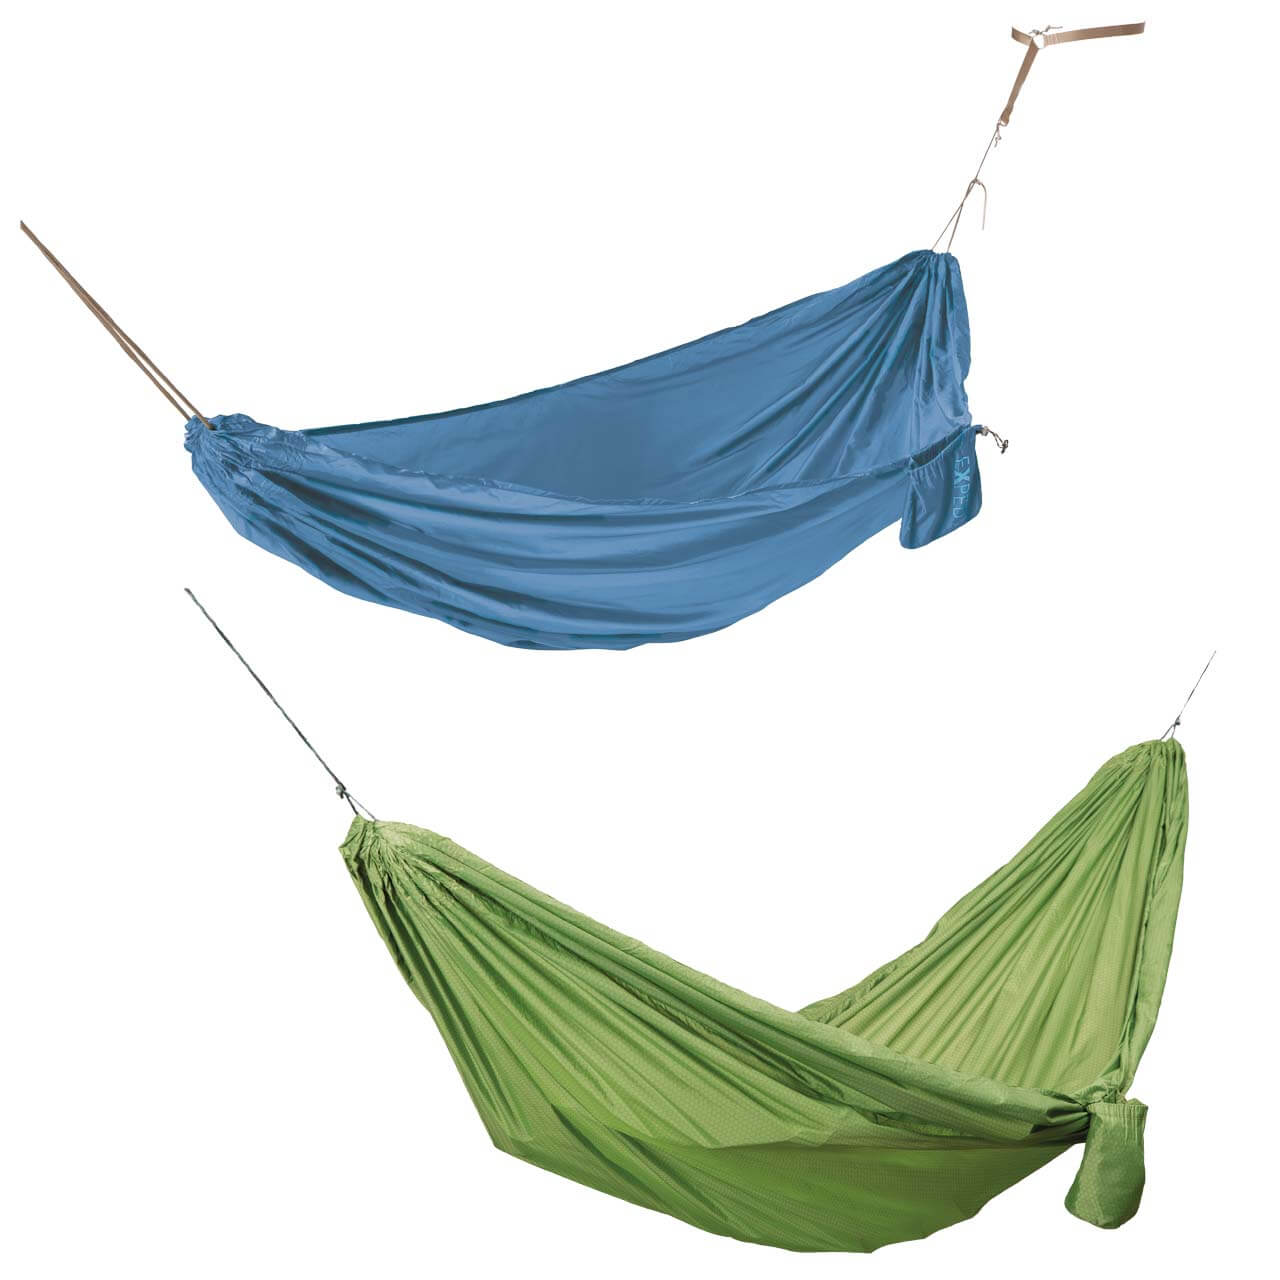 Exped Travel Hammock Duo Wide